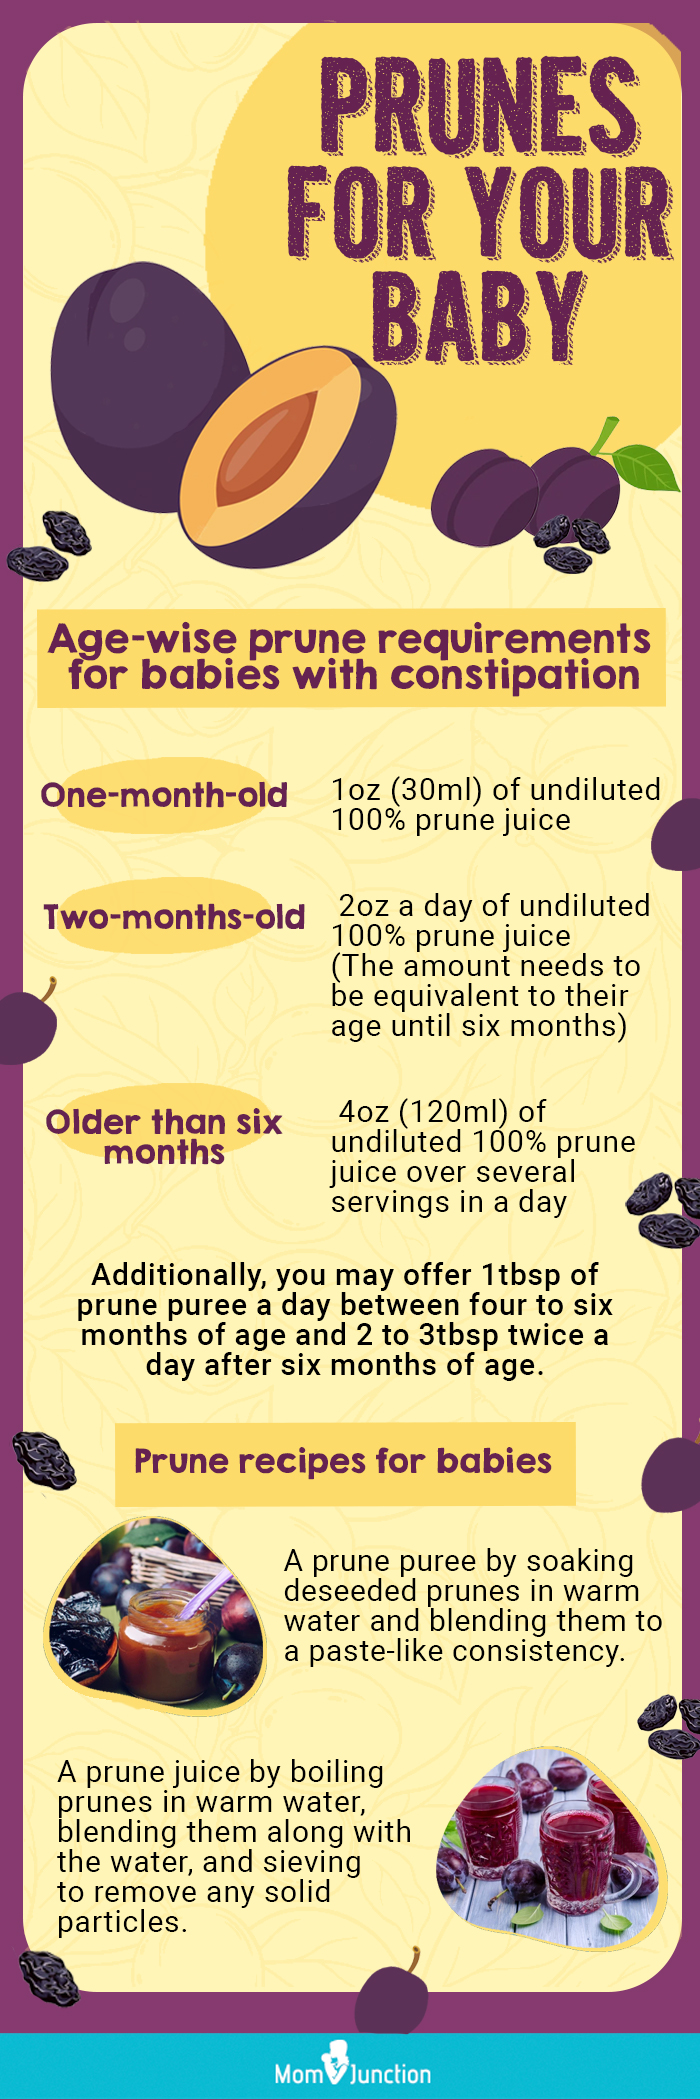 prunes for your baby (infographic)